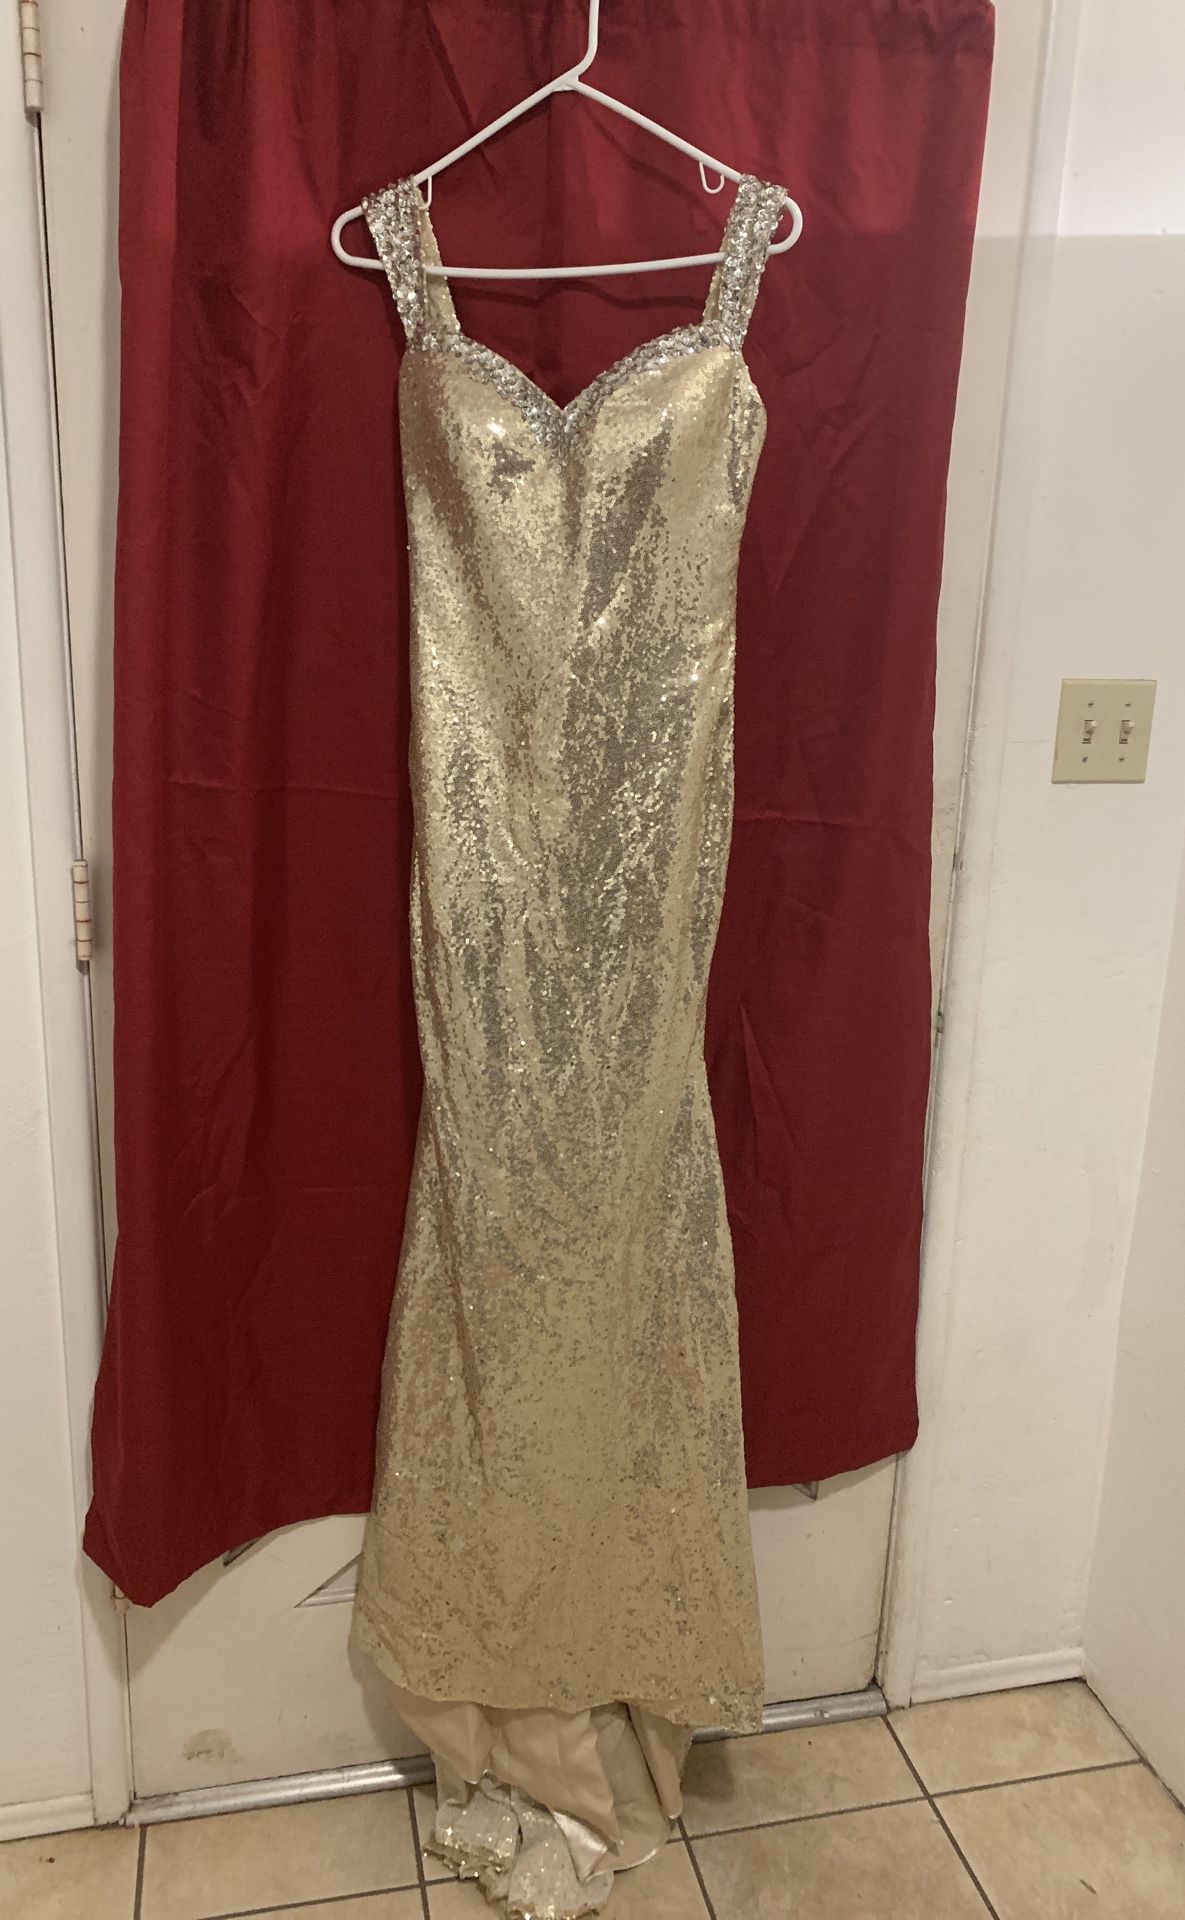 Gold sequin dress size 6. New. Never Worn $50